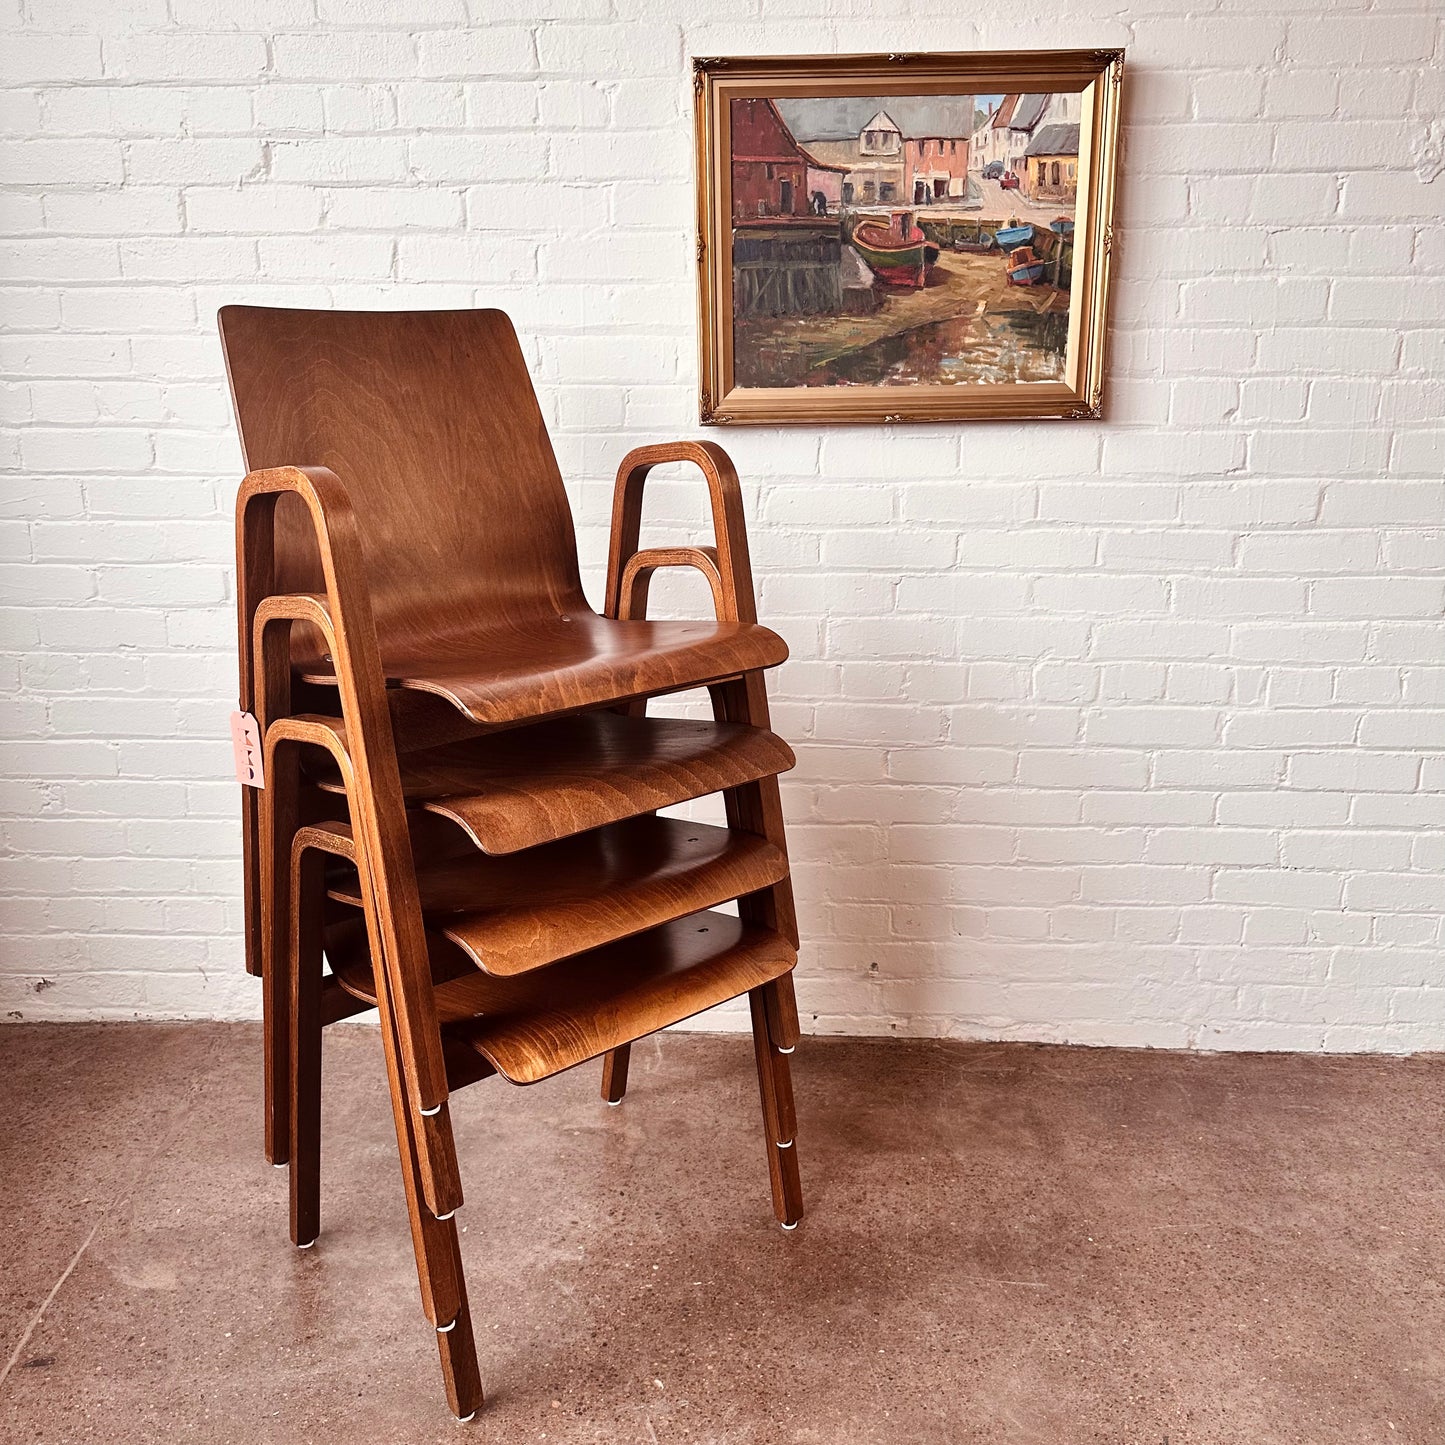 SET OF 4 BENTWOOD STACKING ARM CHAIRS - MADE IN HOLLAND